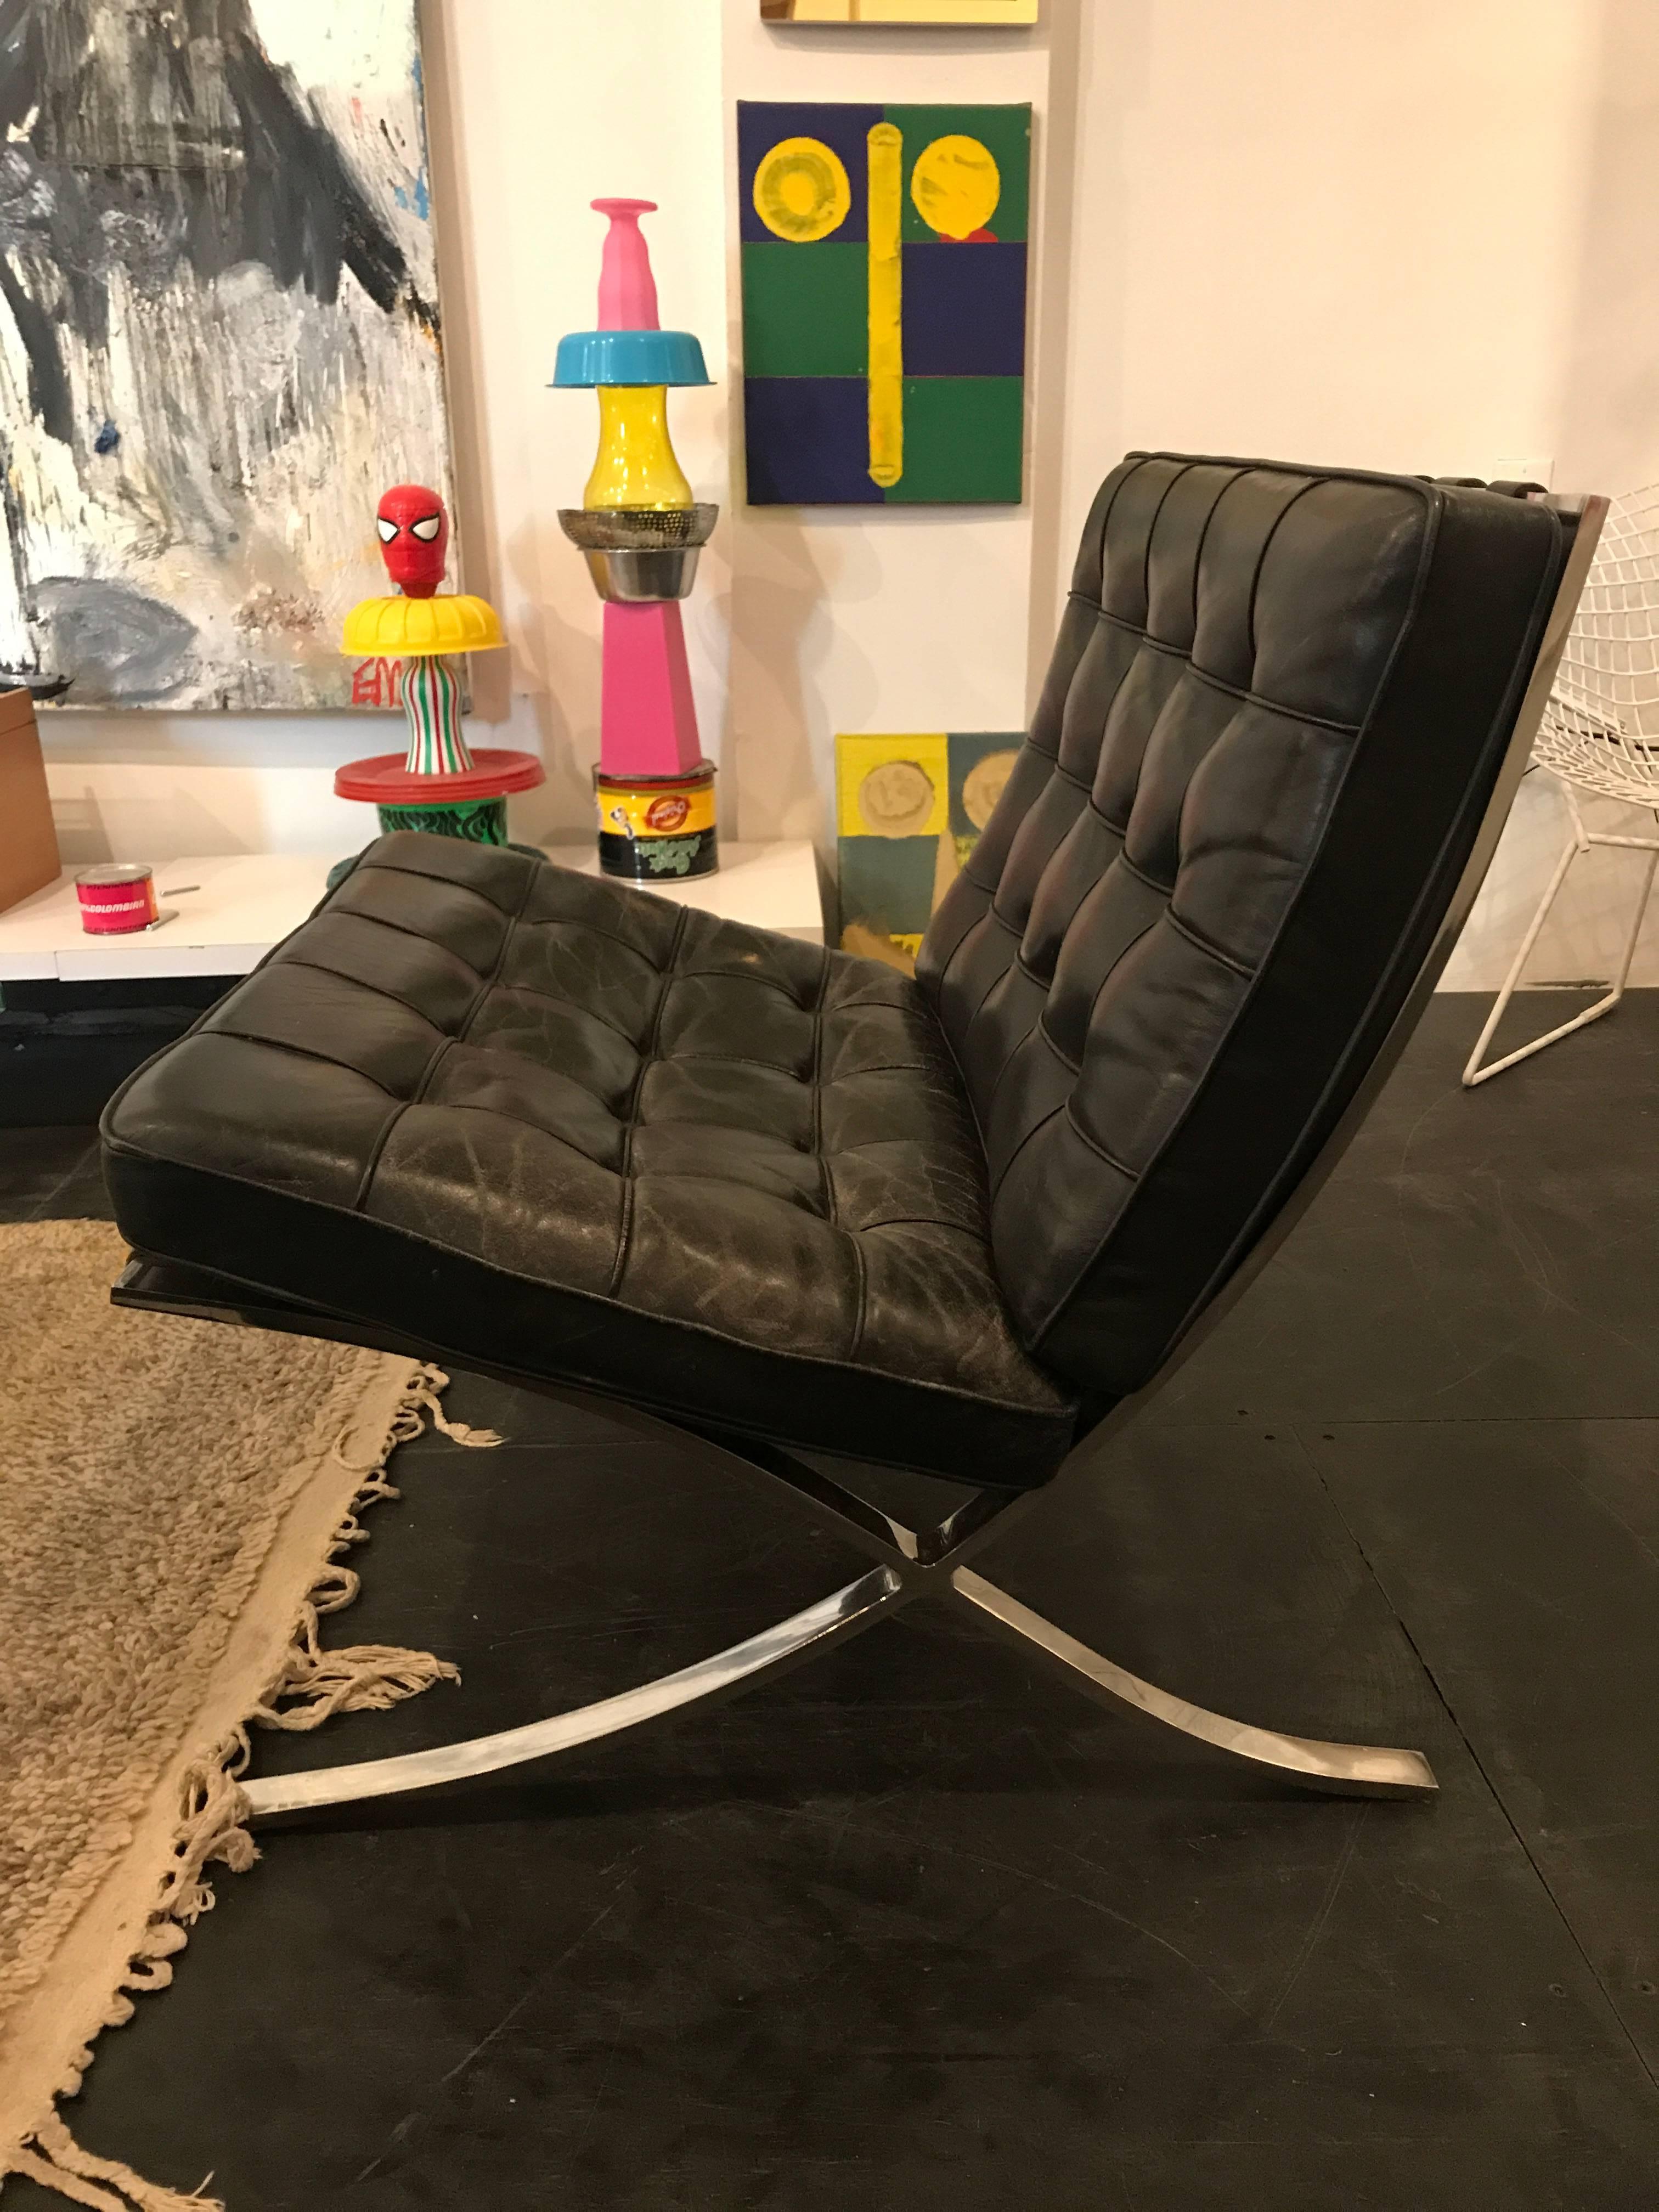 Bauhaus Ludwig Mies van der Rohe Pair of Barcelona Chairs, Knoll, Black Leather